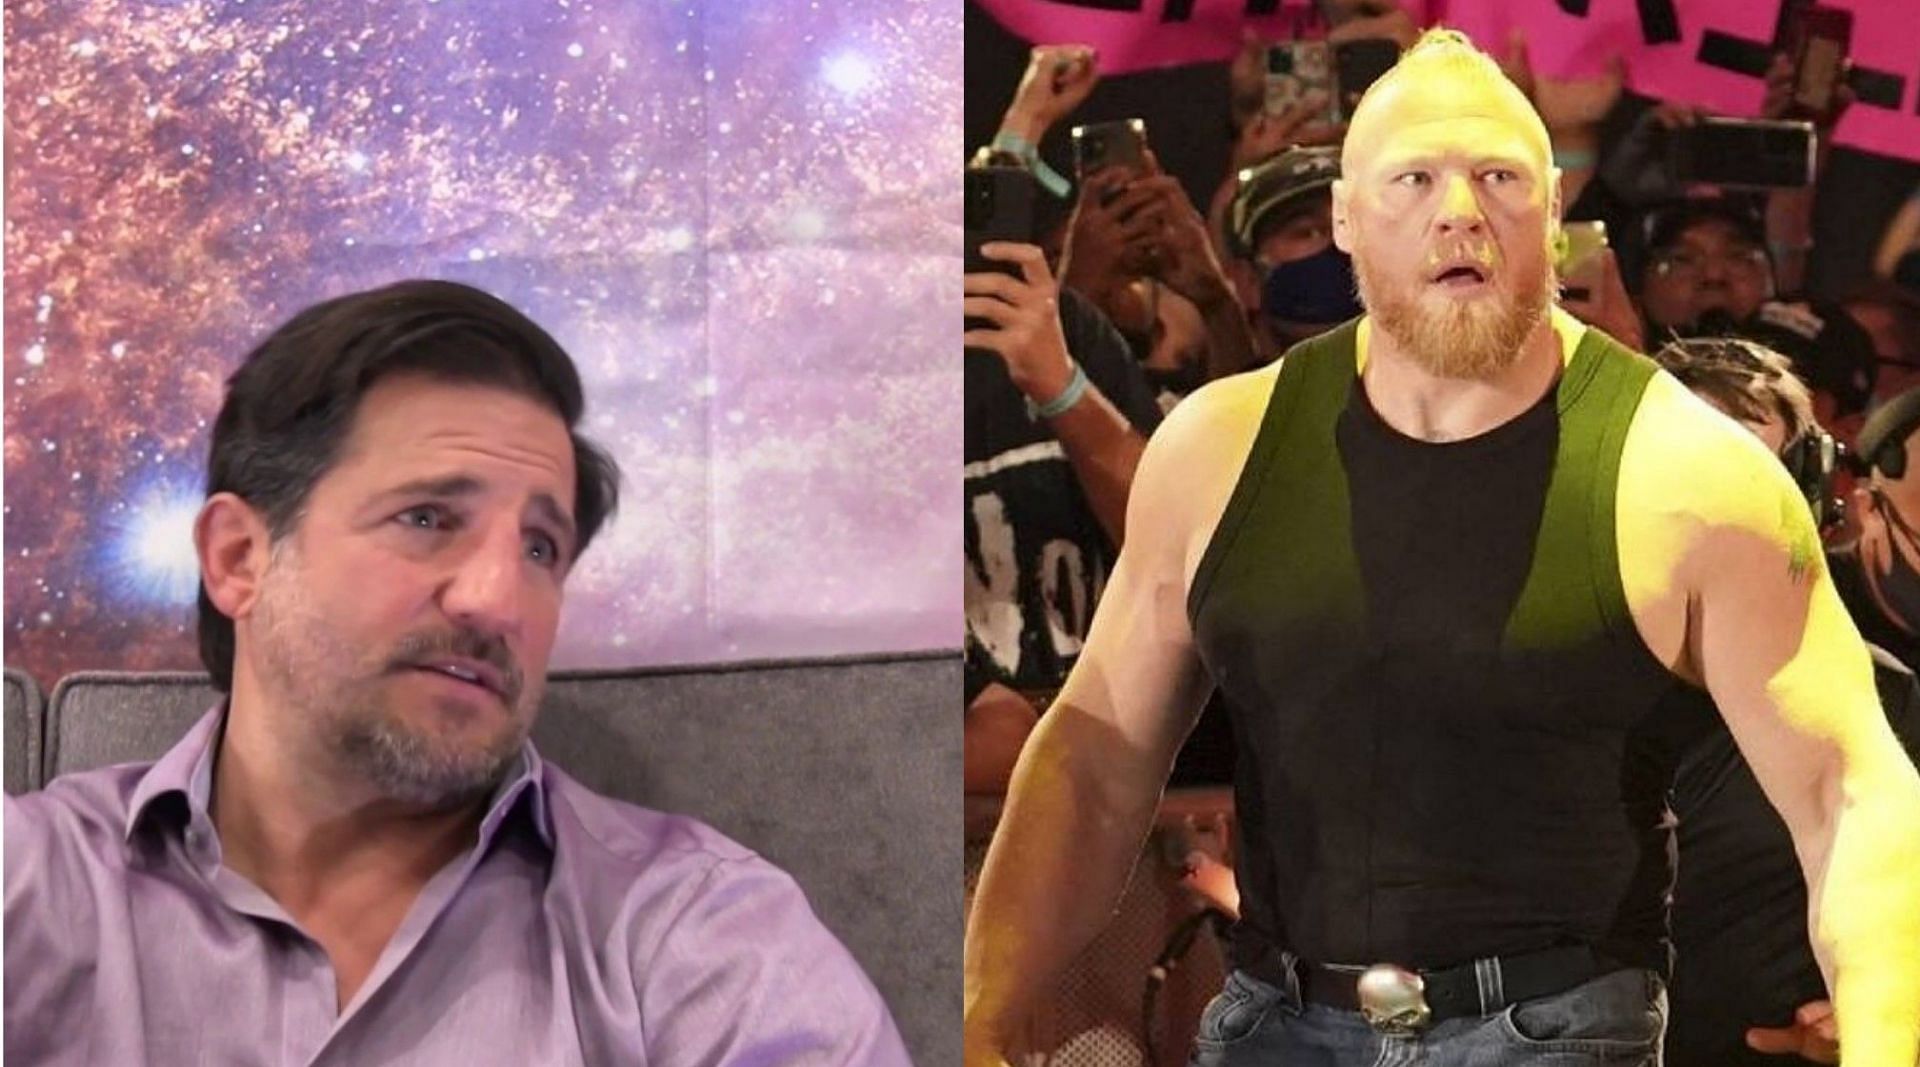 Disco Inferno (left) and Brock Lesnar (right)